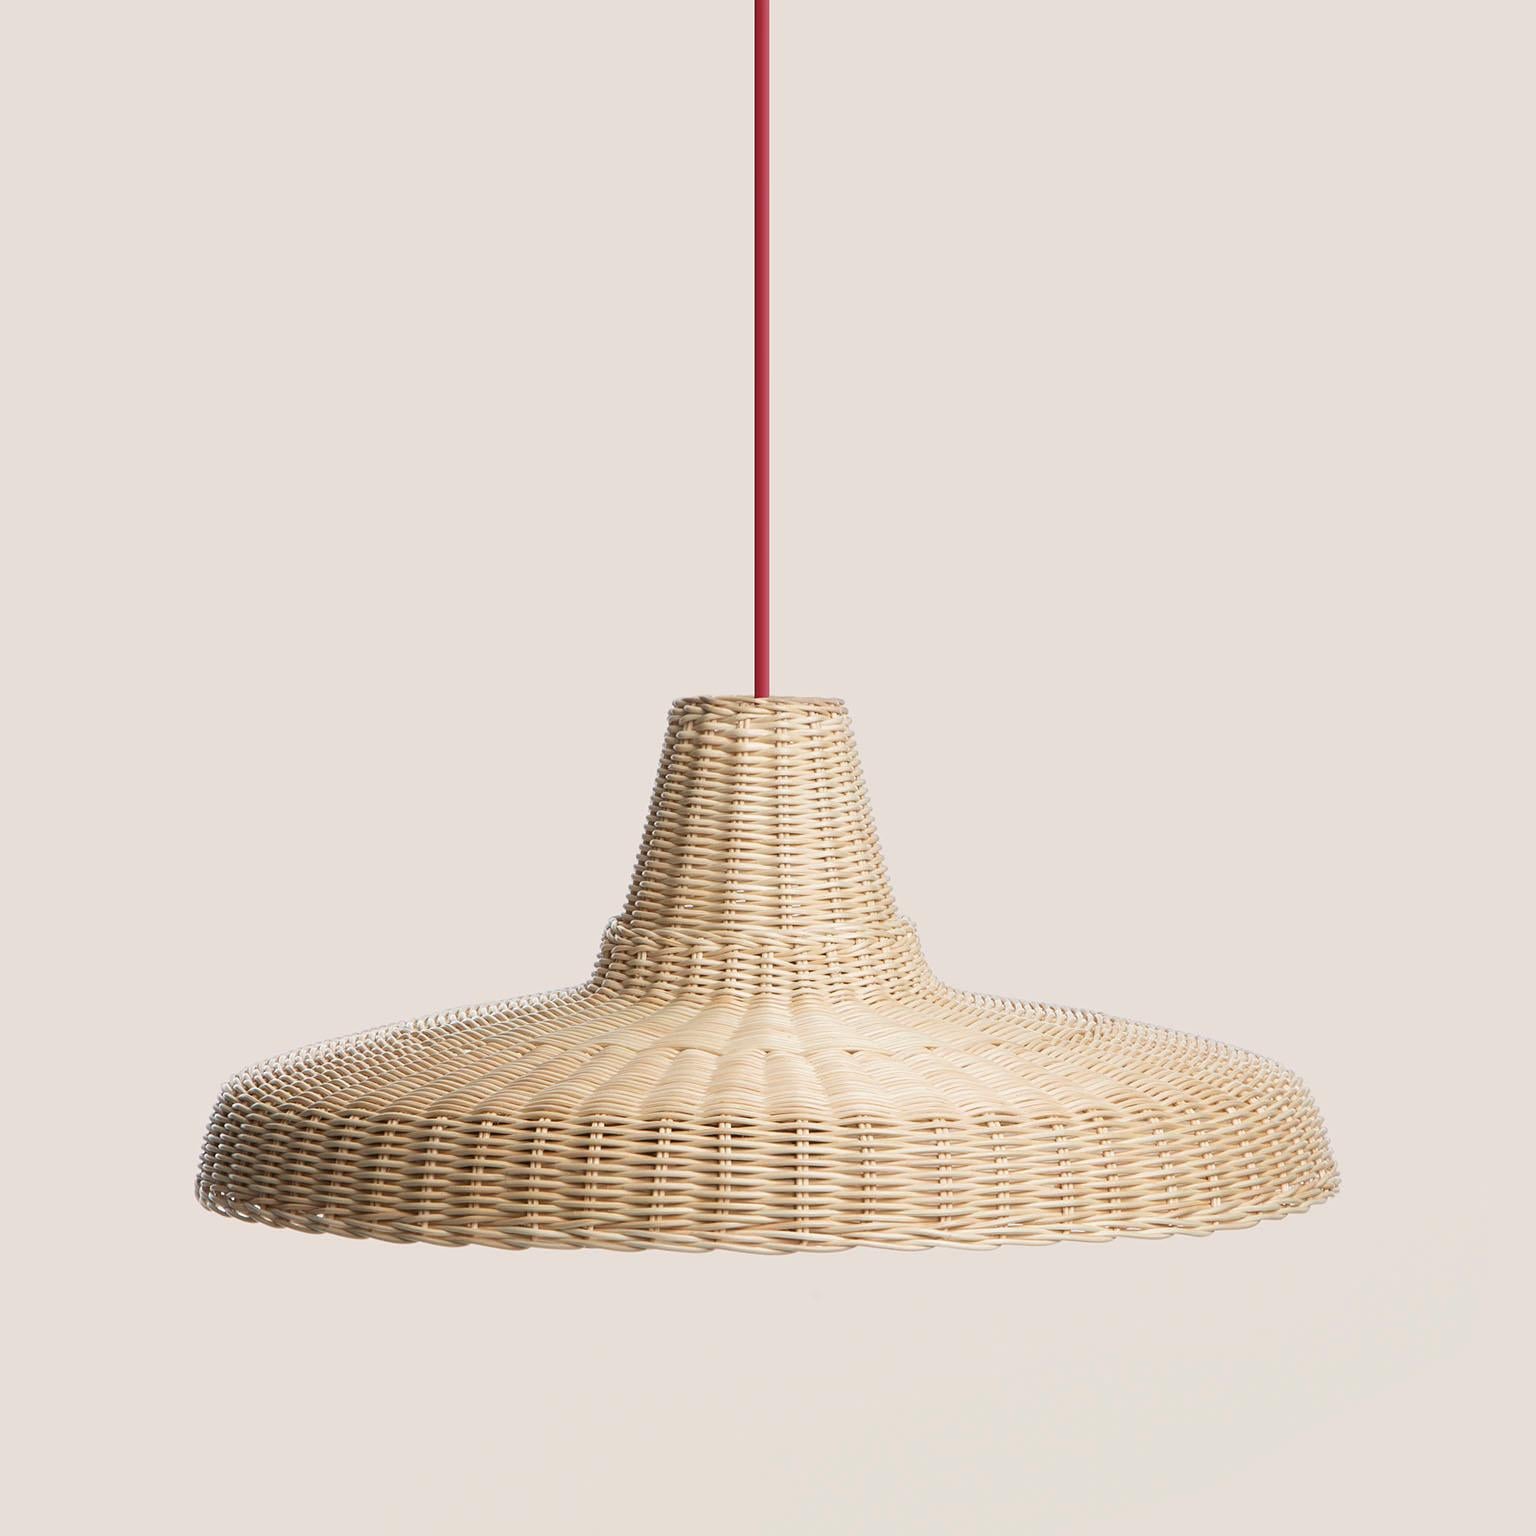 Pendant light with lampshade in intertwined wicker. 135 meters of wicker are carefully selected and then skilfully shaped for over 6.5 hours of patient intertwining.
The Cocolla lamp is subject to a water-color protective treatment of natural,